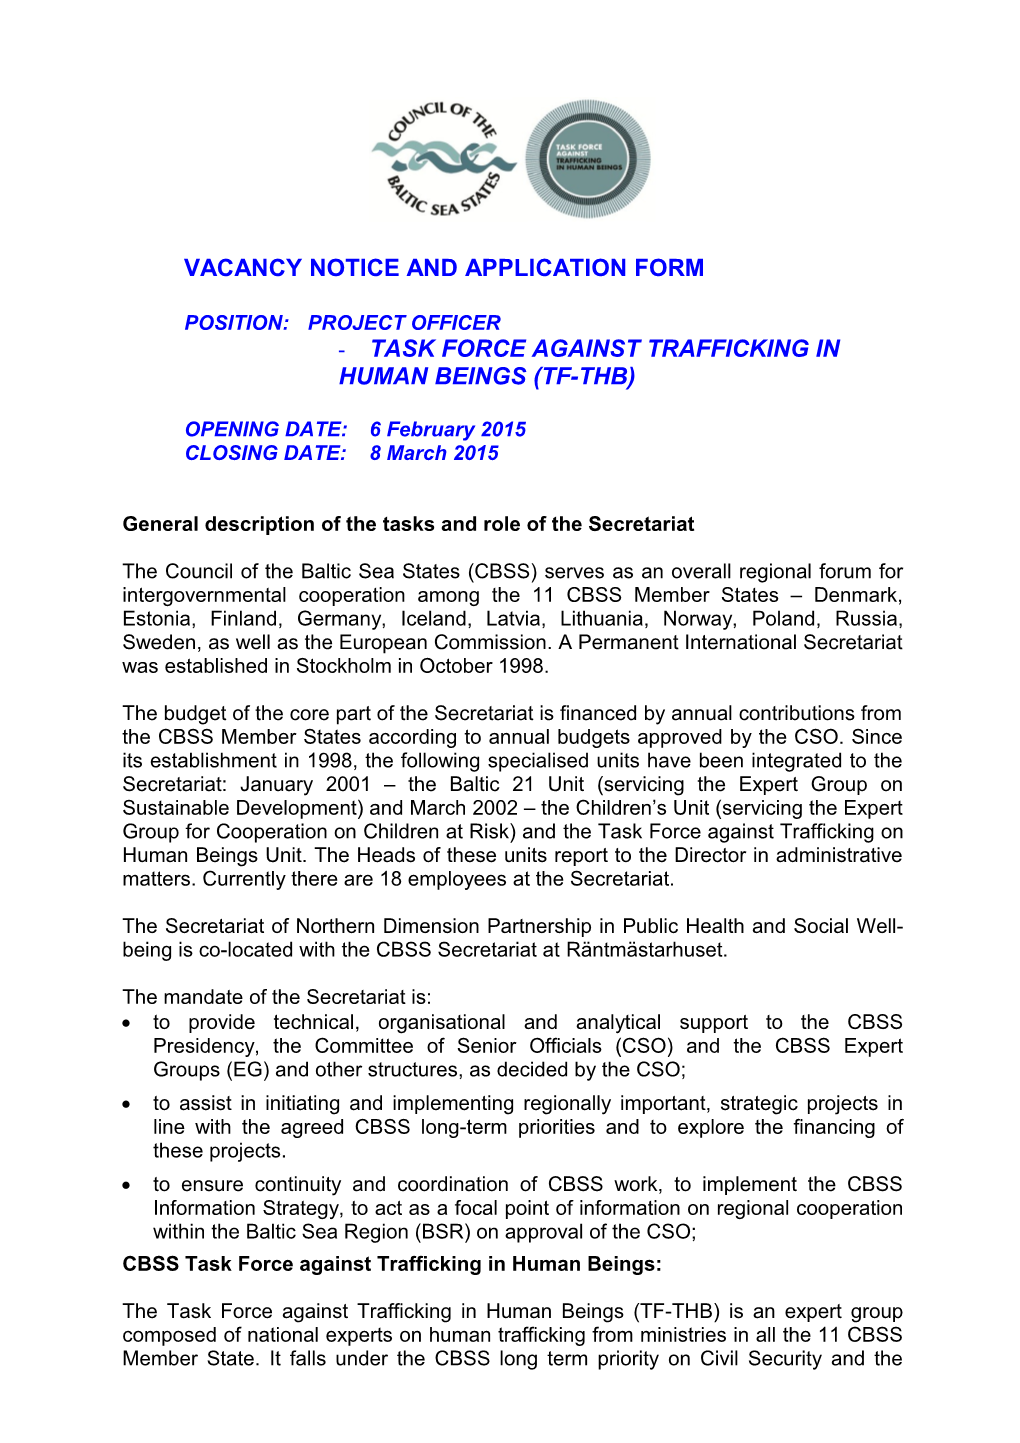 Vacancy Notice and Application Form